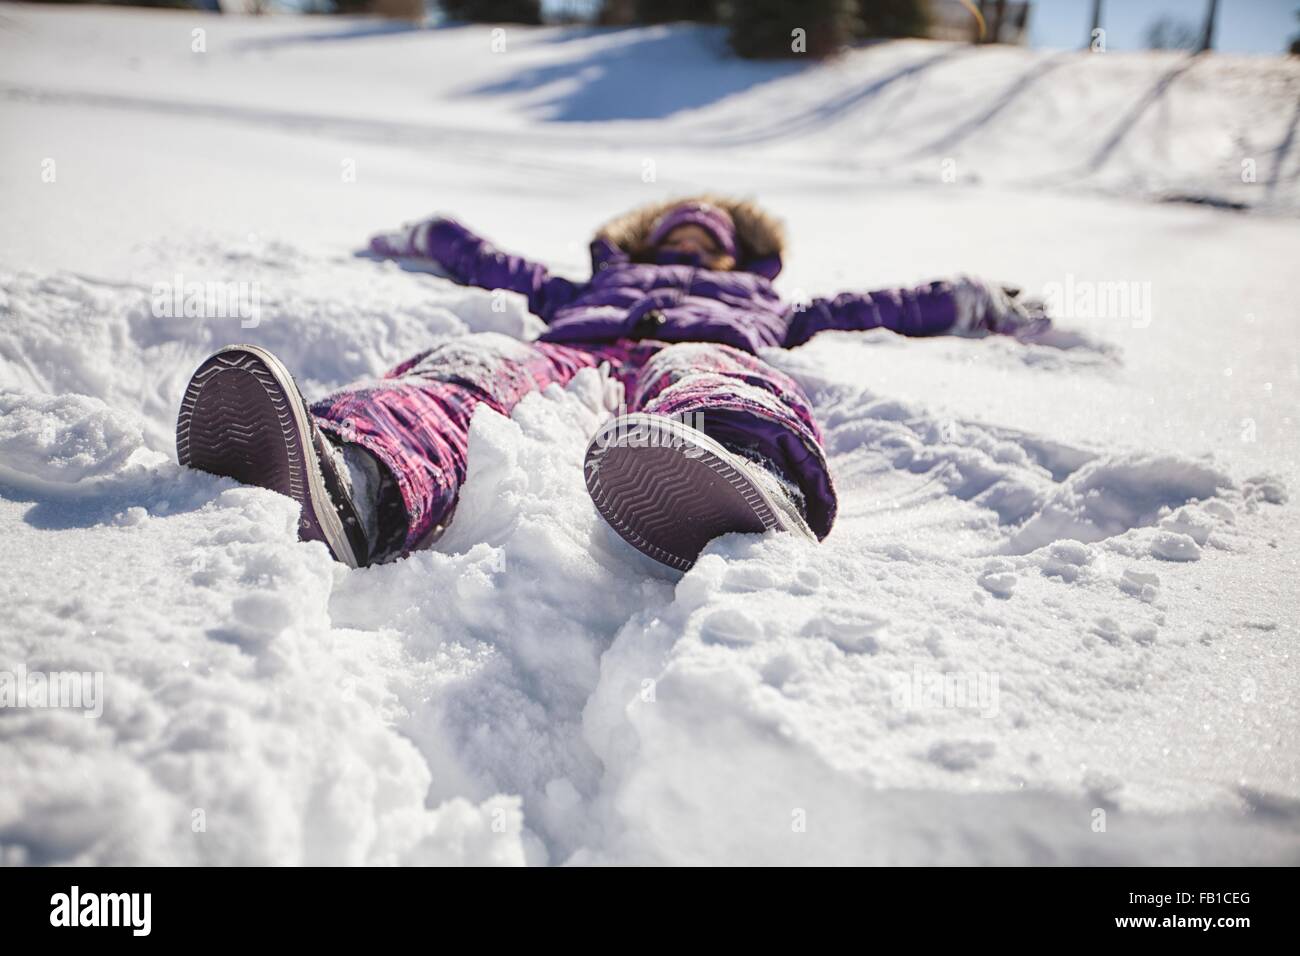 Surface level view of girl wearing ski suit lying snow making snow angel Stock Photo